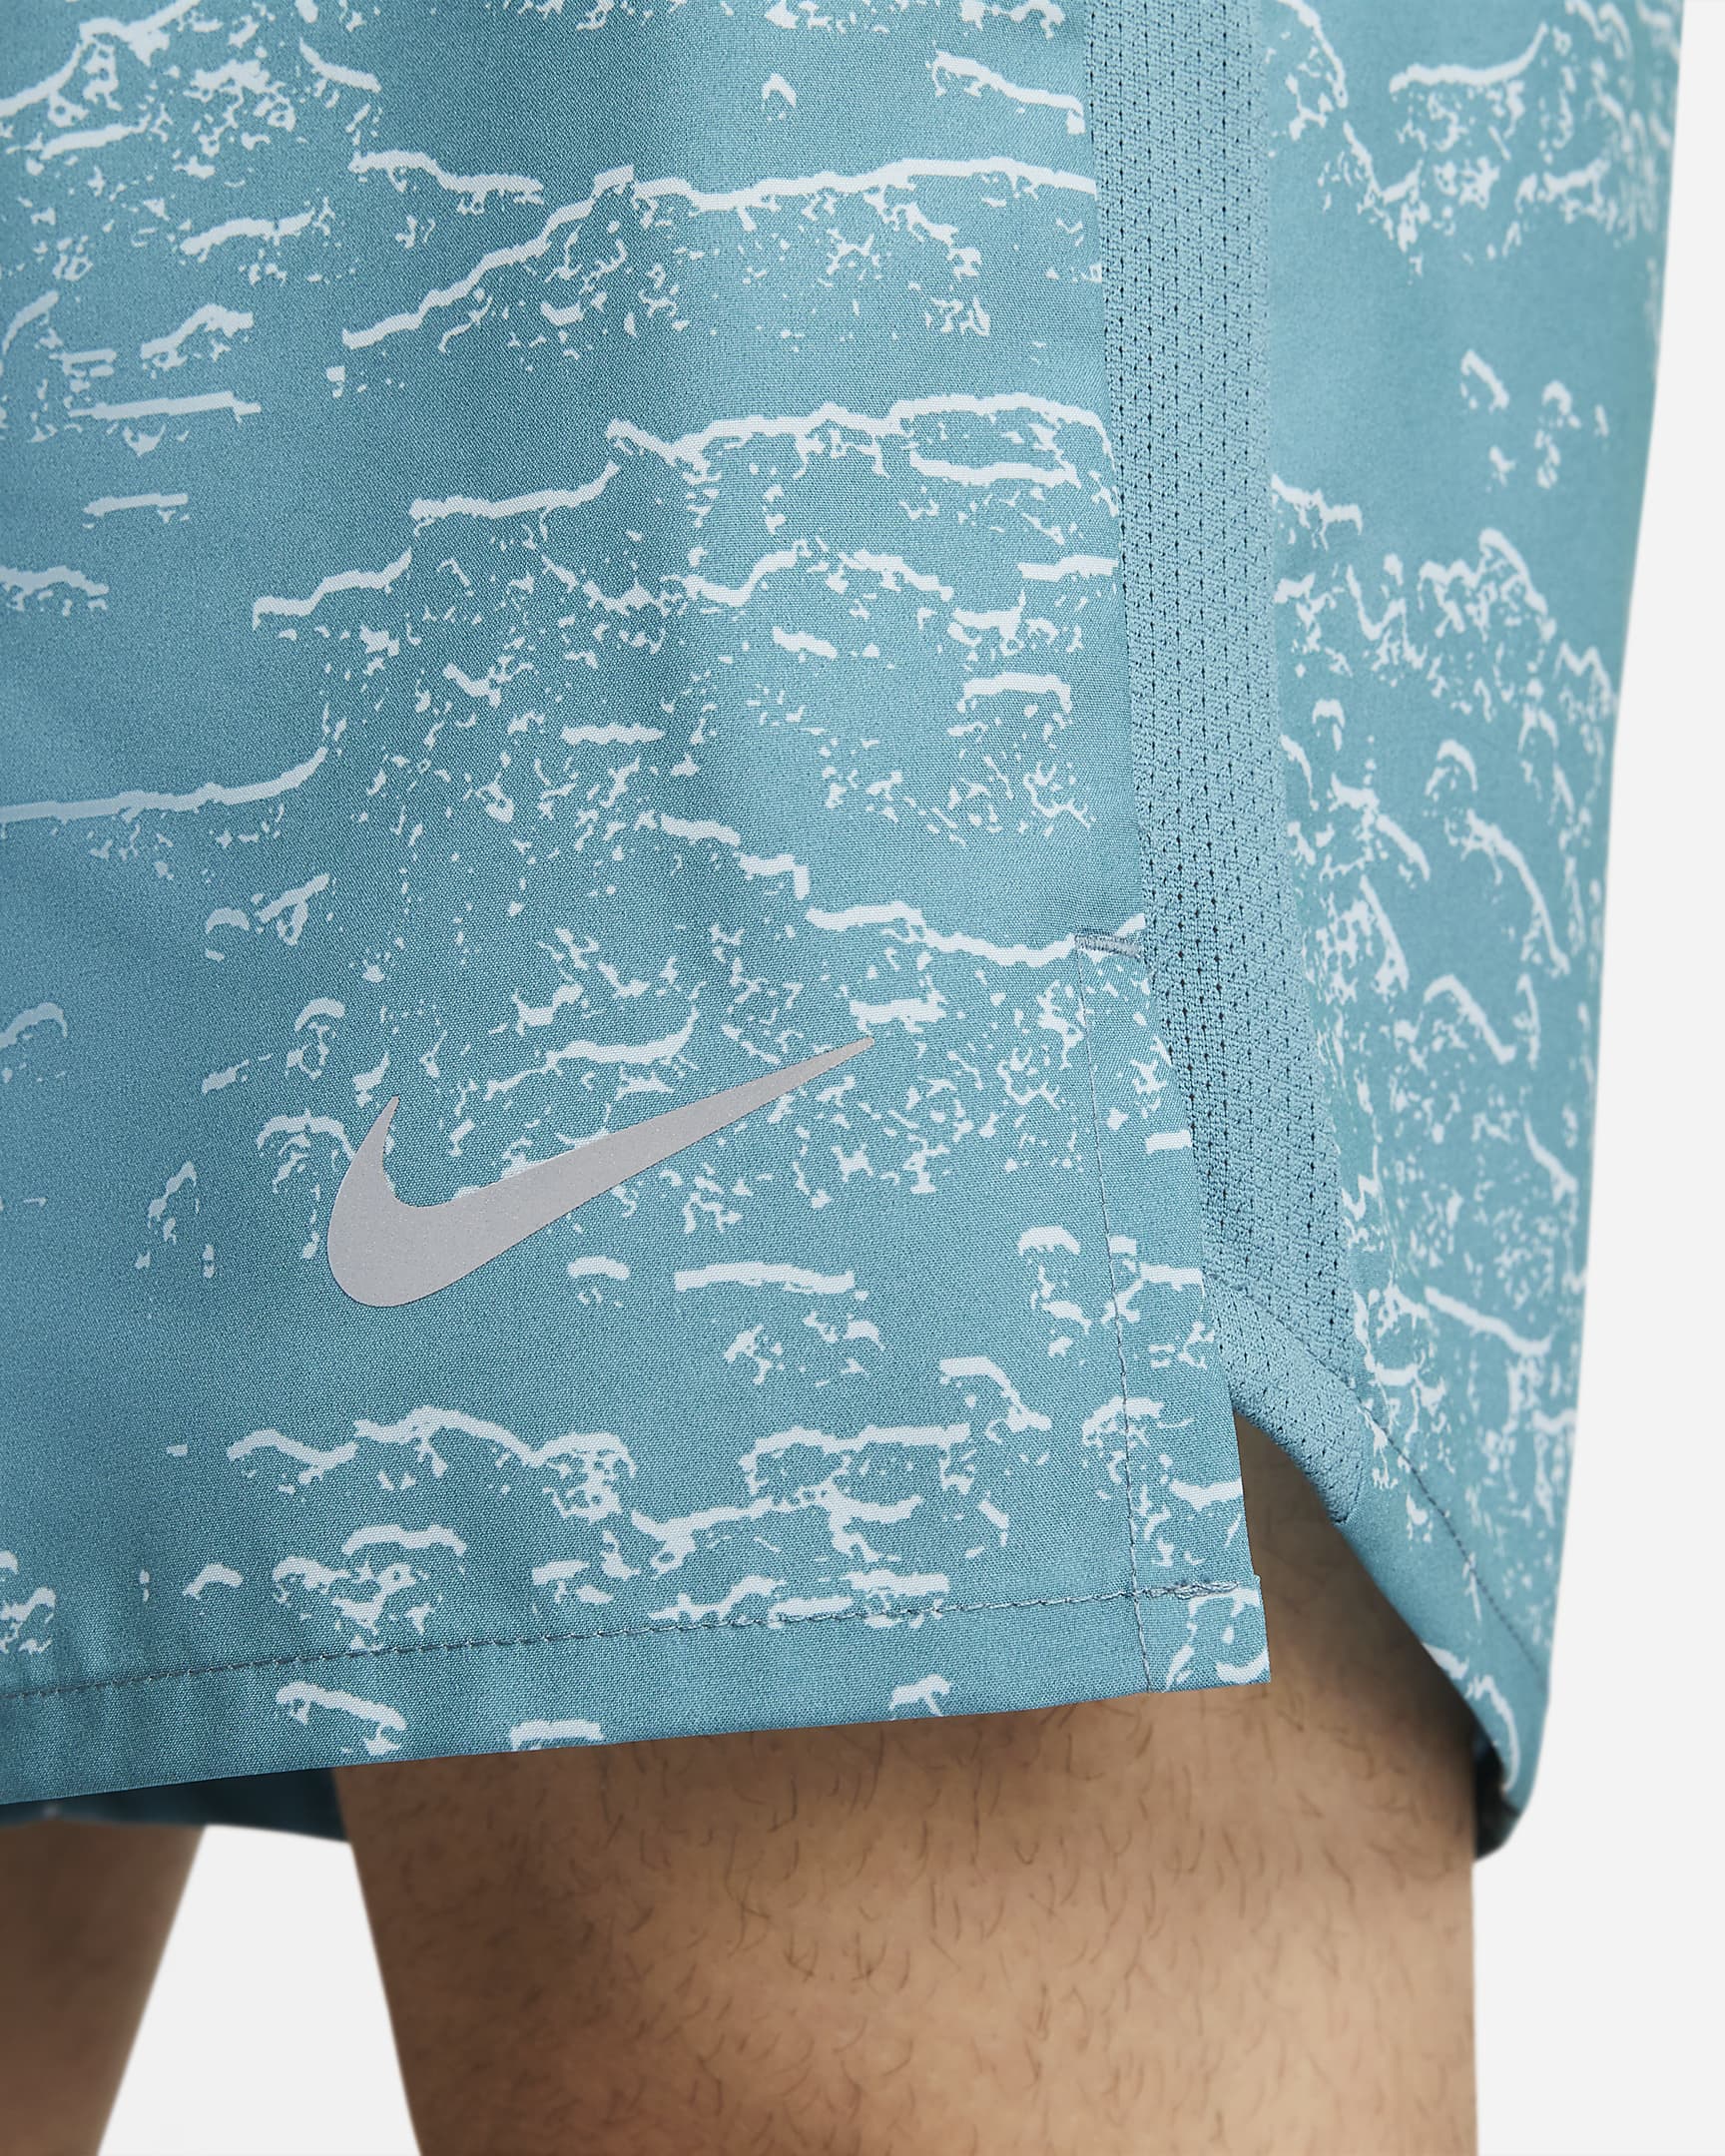 Nike Dri-FIT Run Division Challenger Men's 18cm (approx.) Brief-Lined ...